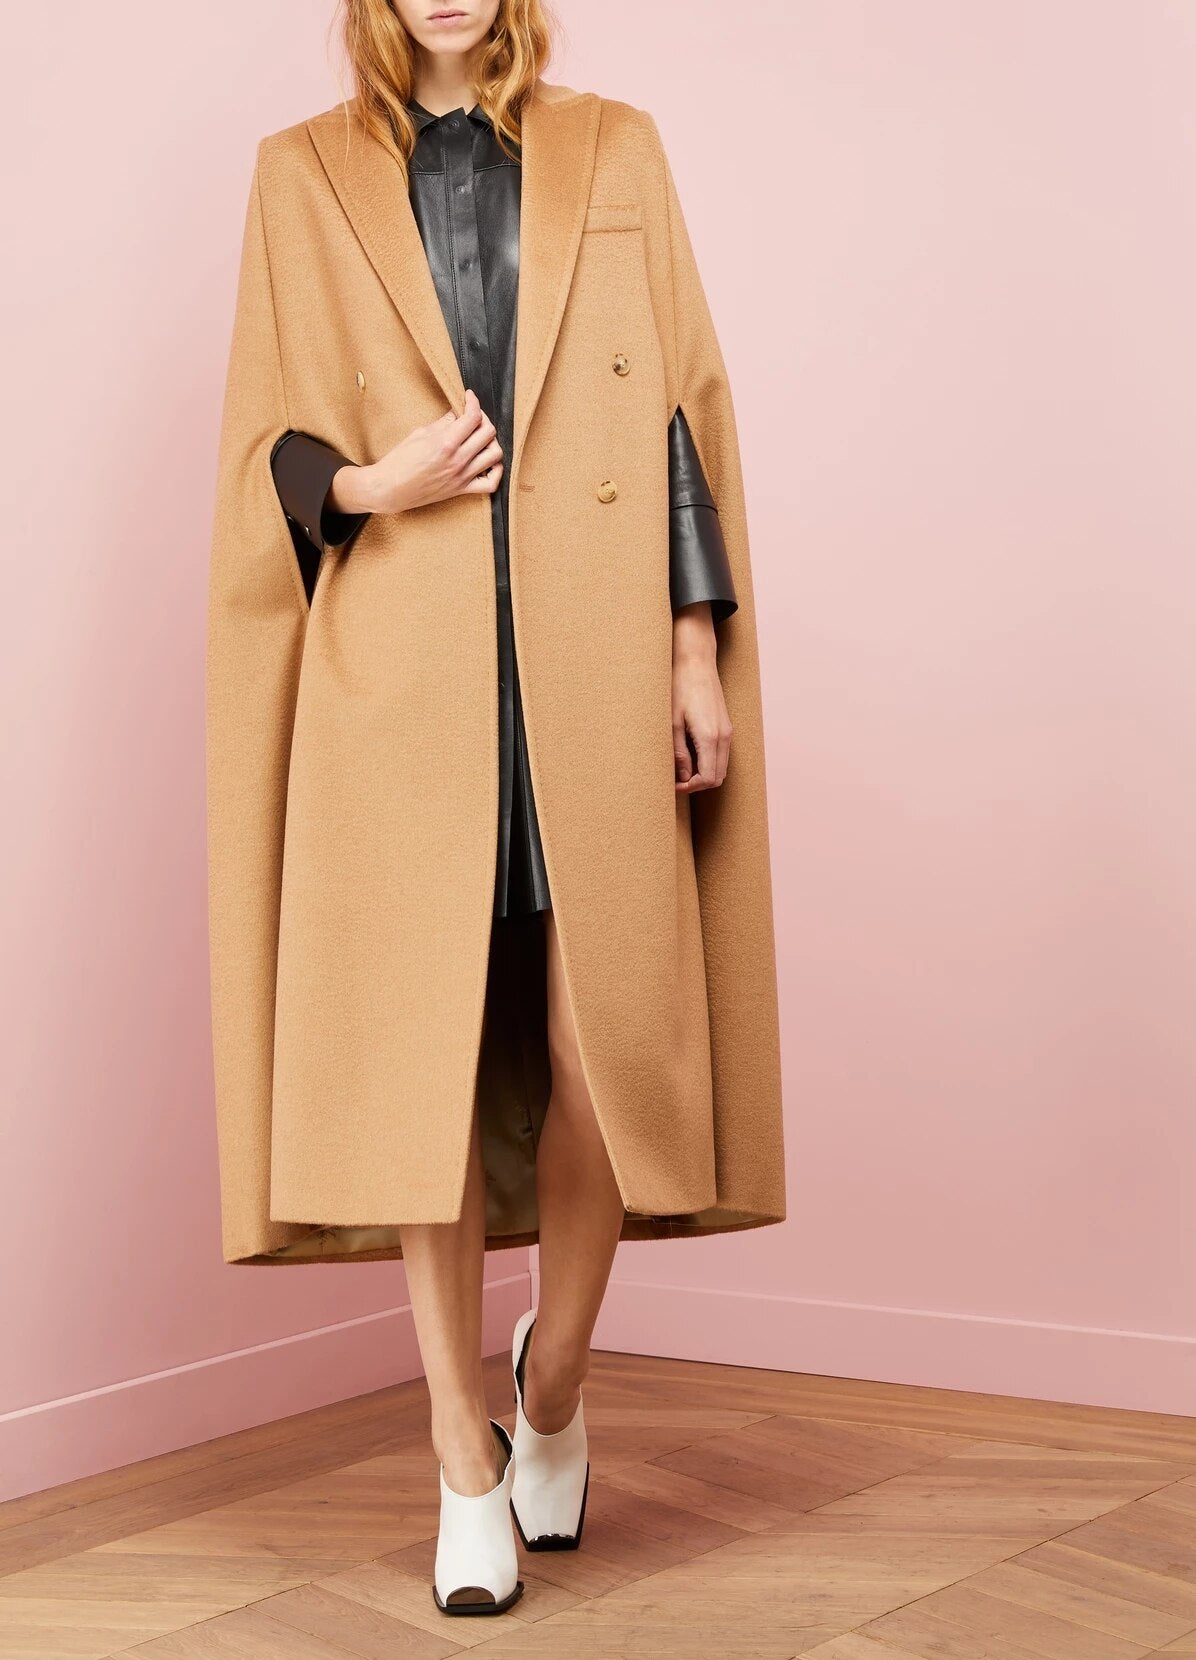 AEL Fashion Oversized Women Double Face Cloak Woolen Coat 2018 Hight Quality with Lengthen Thickening Keep Warm Winter Overcoat